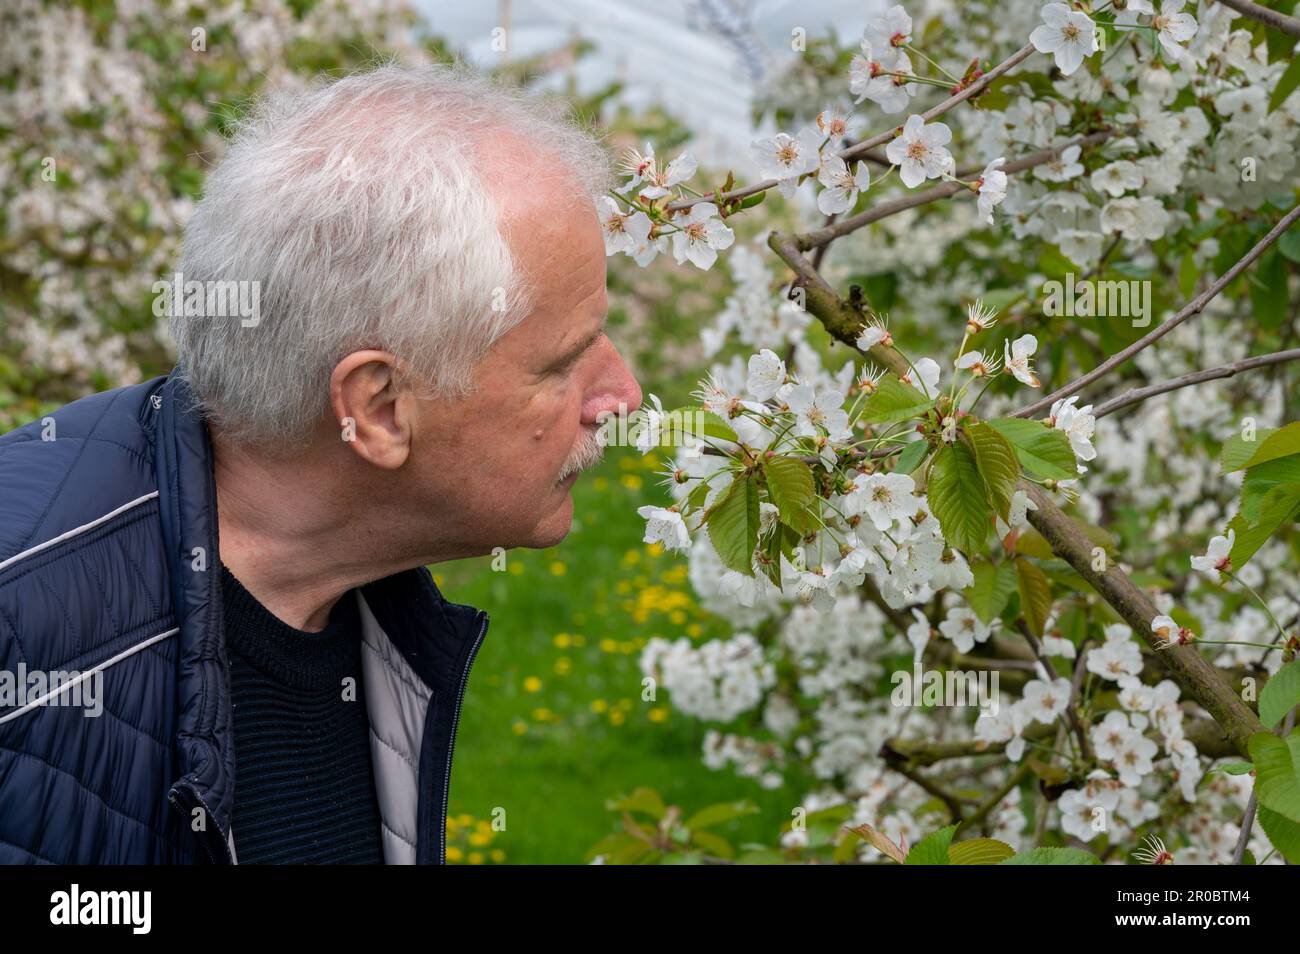 Cherry trees in full bloom in Germany. Farmer inspecting the orchard. Stock Photo